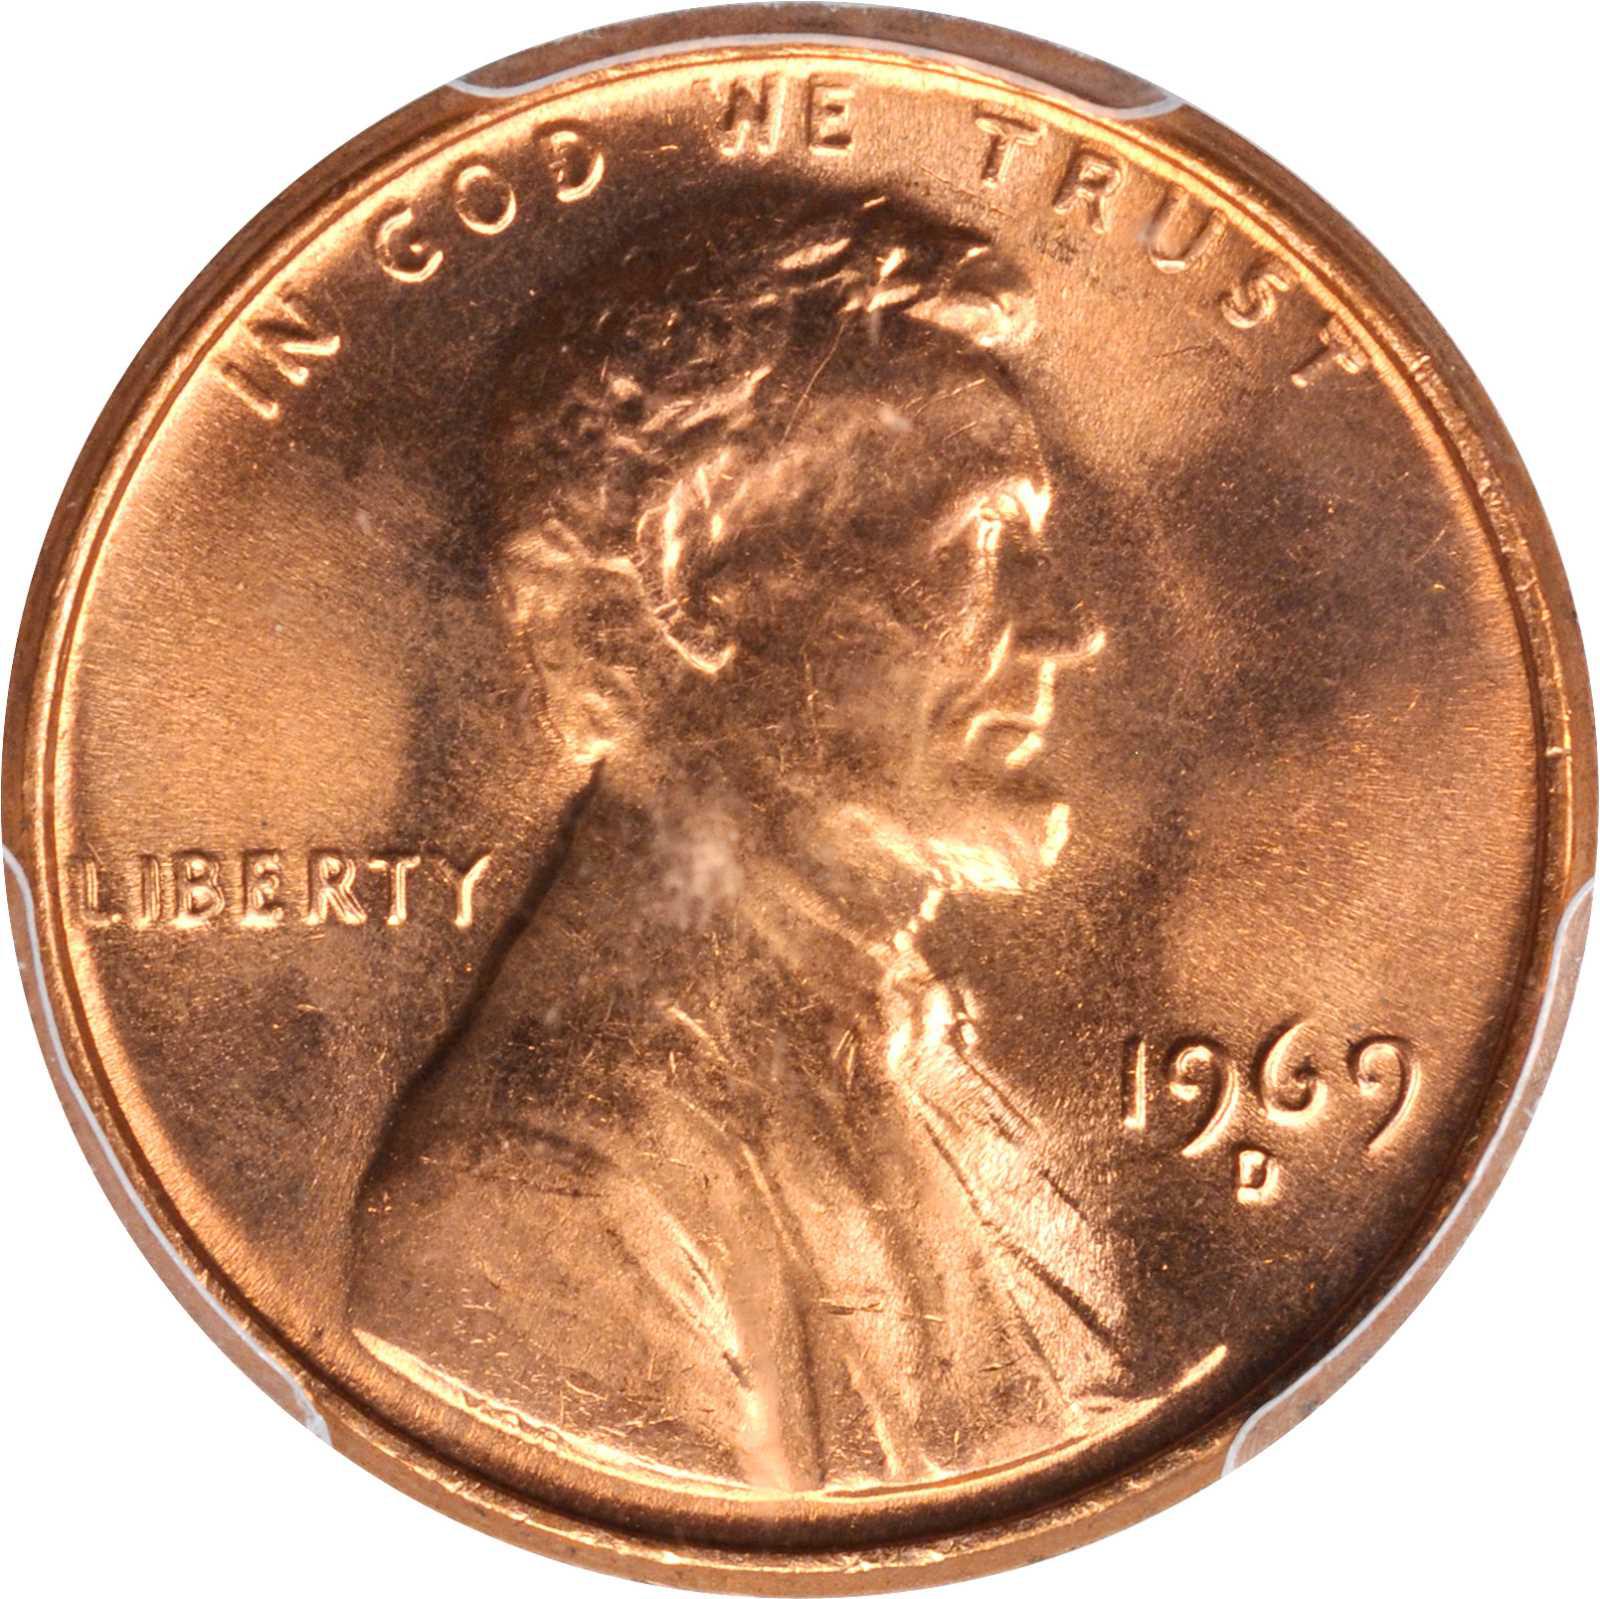 Value Of 1969 D Lincoln Cents We Appraise Modern Coins,Types Of Cacti